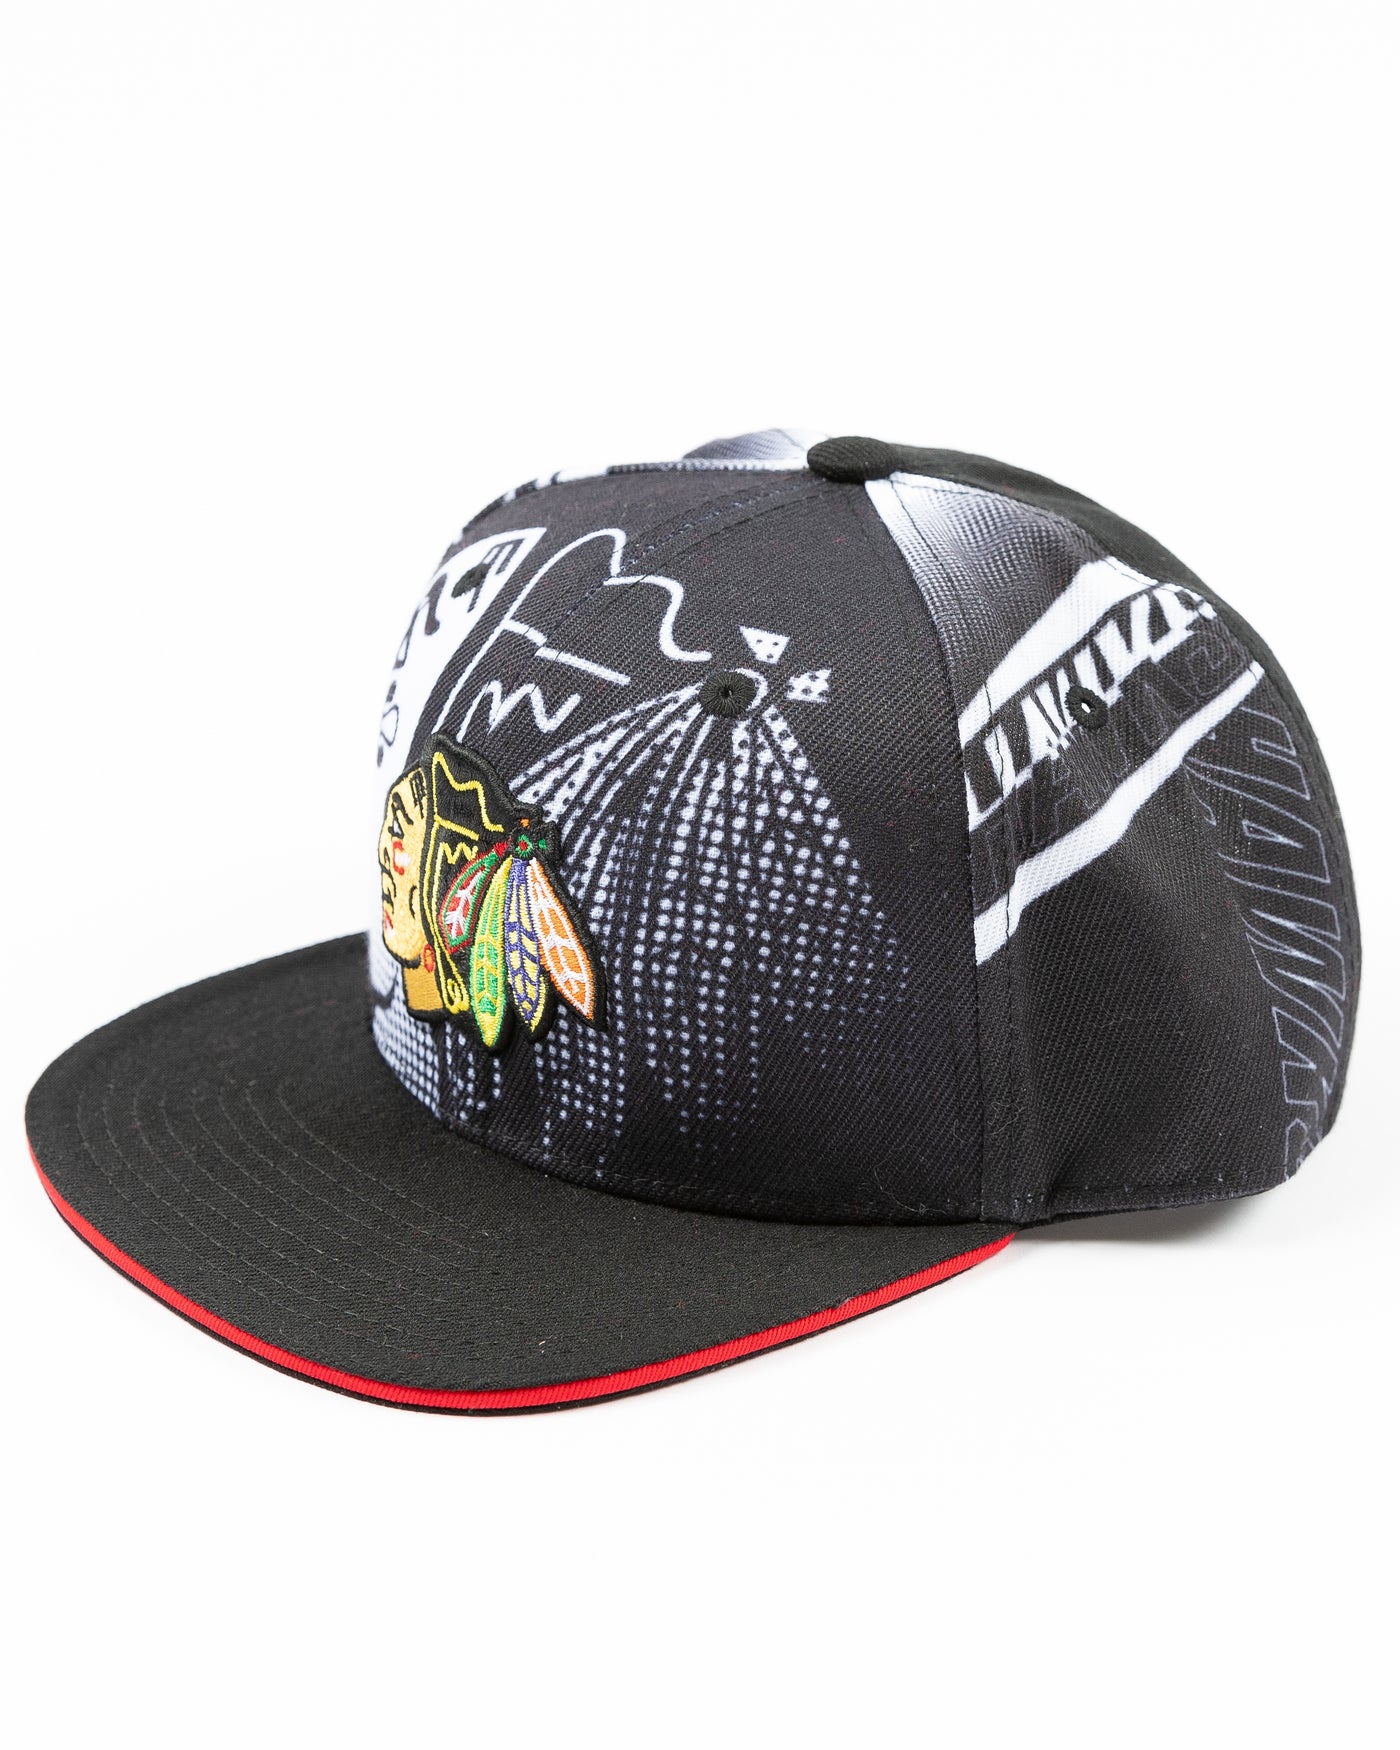 black and white all over print youth snapback cap with Chicago Blackhawks primary logo embroidered on front - left angle lay flat